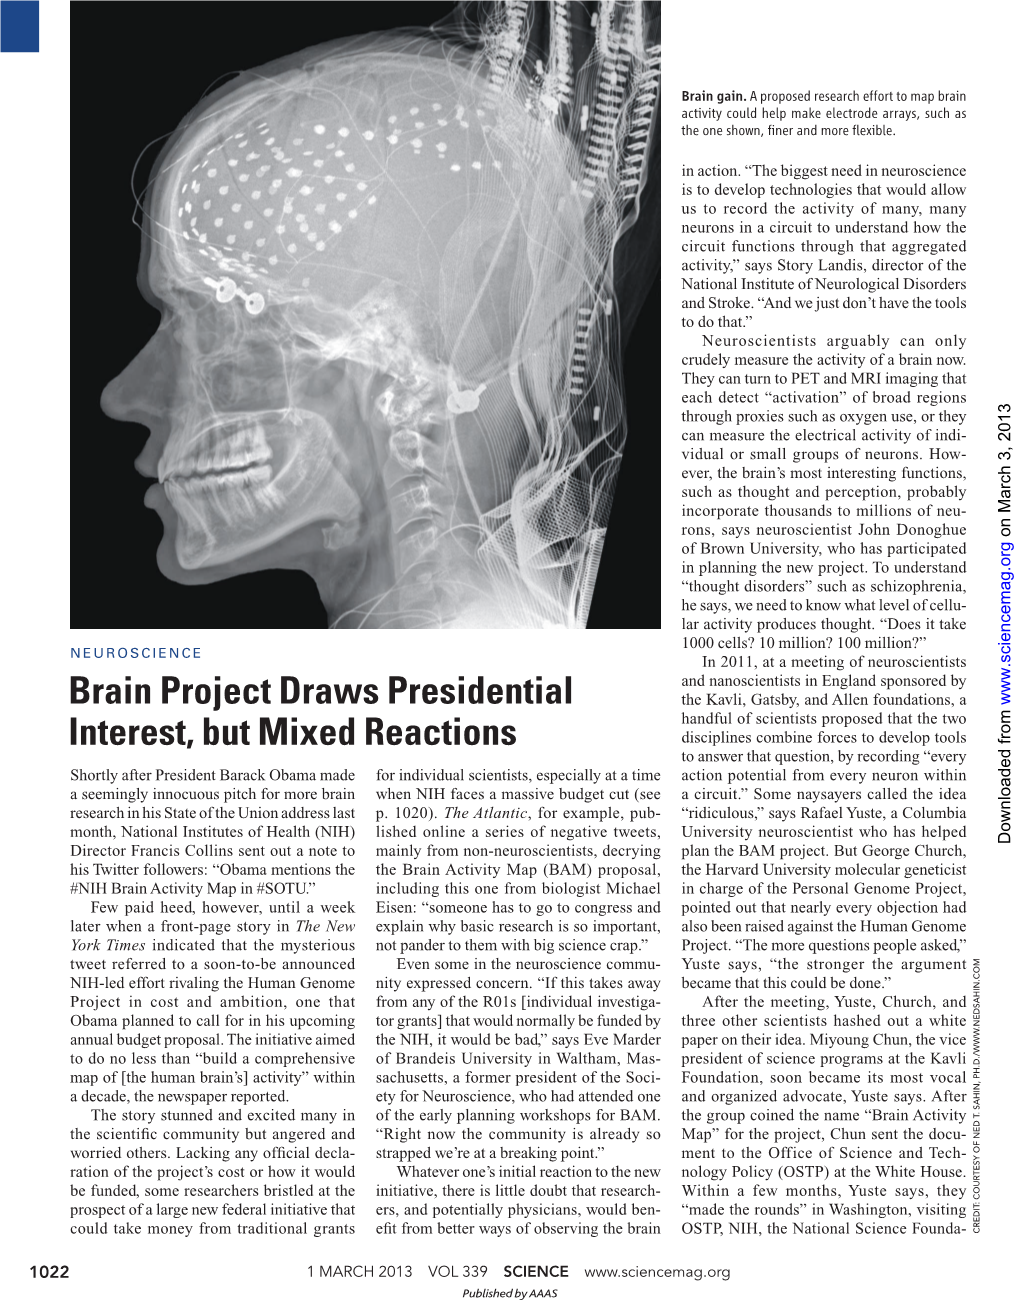 Brain Project Draws Presidential Interest, but Mixed Reactions